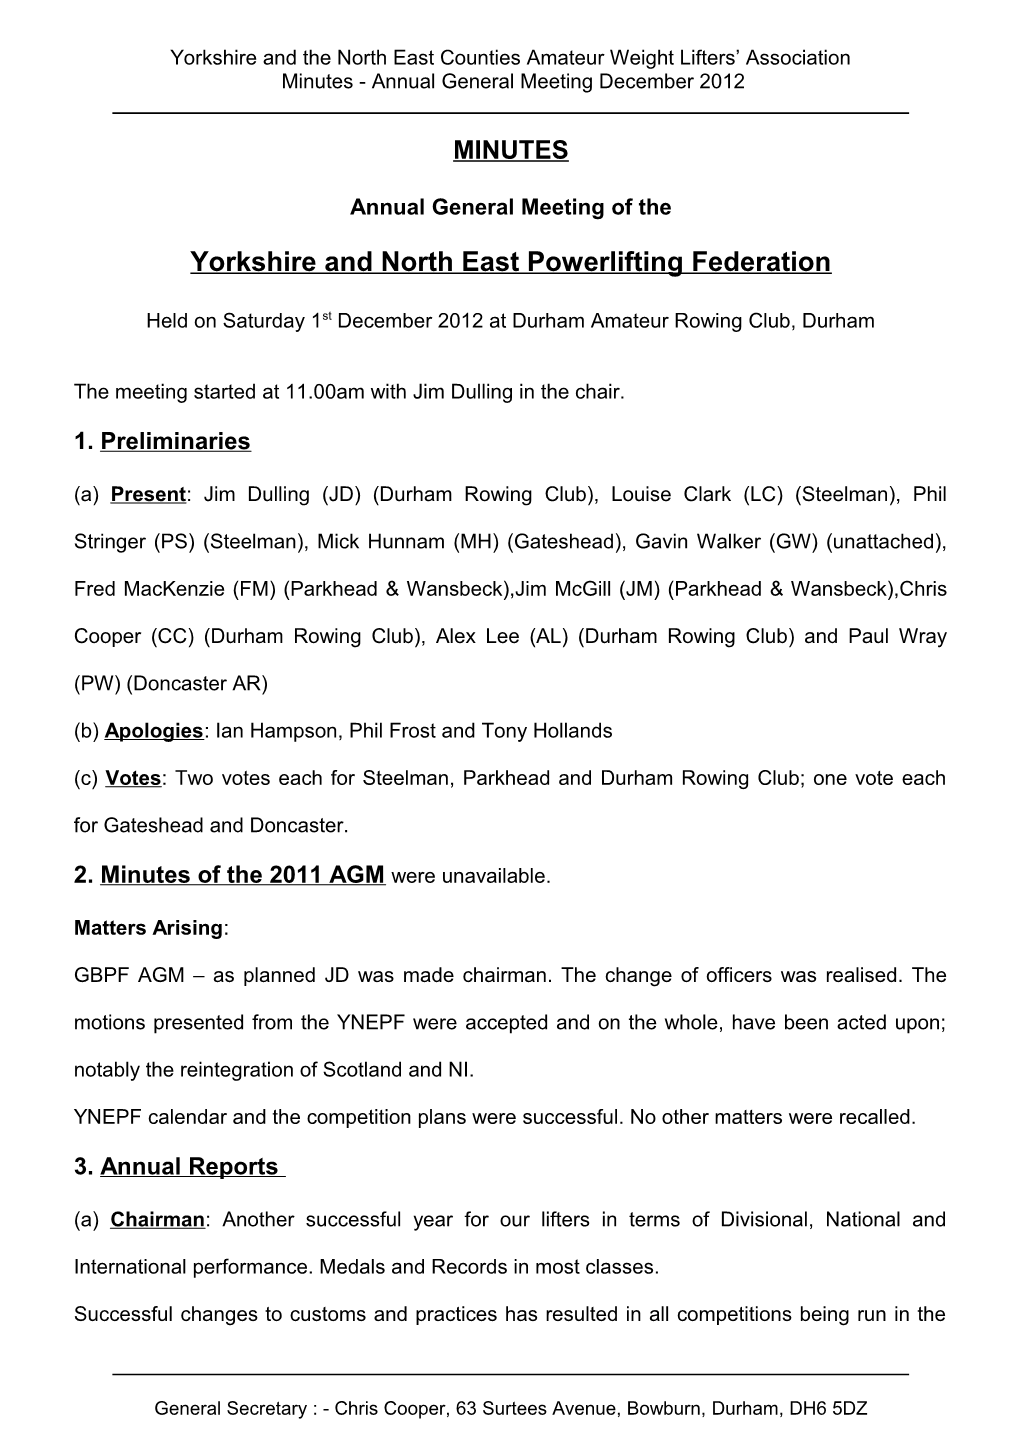 Yorkshire and the North East Counties Amateur Weight Lifters Association